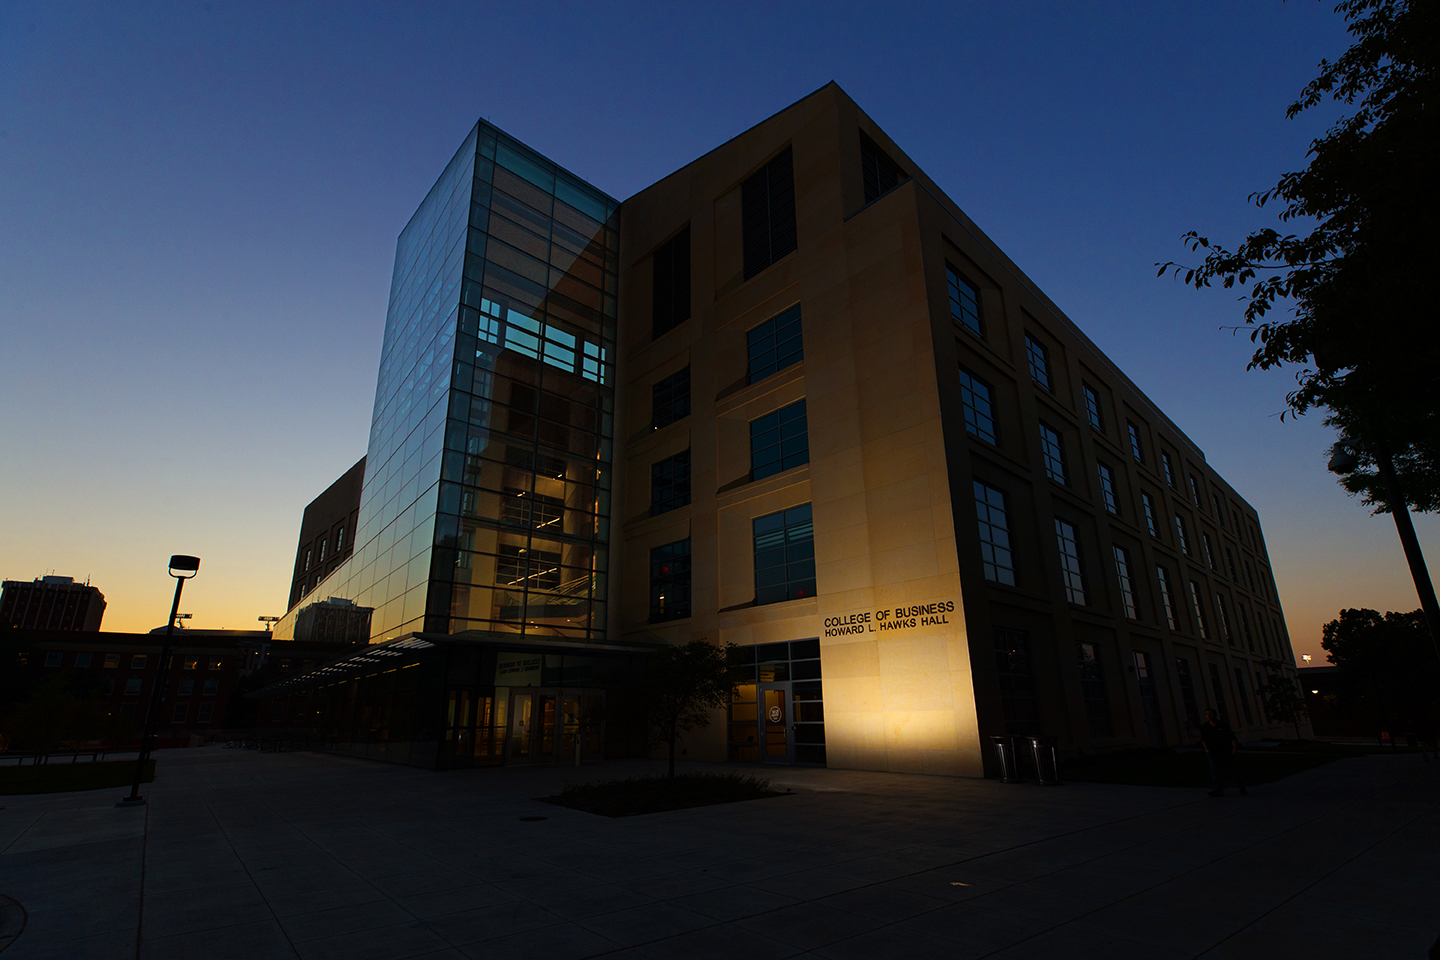 The College of Business building at dusk